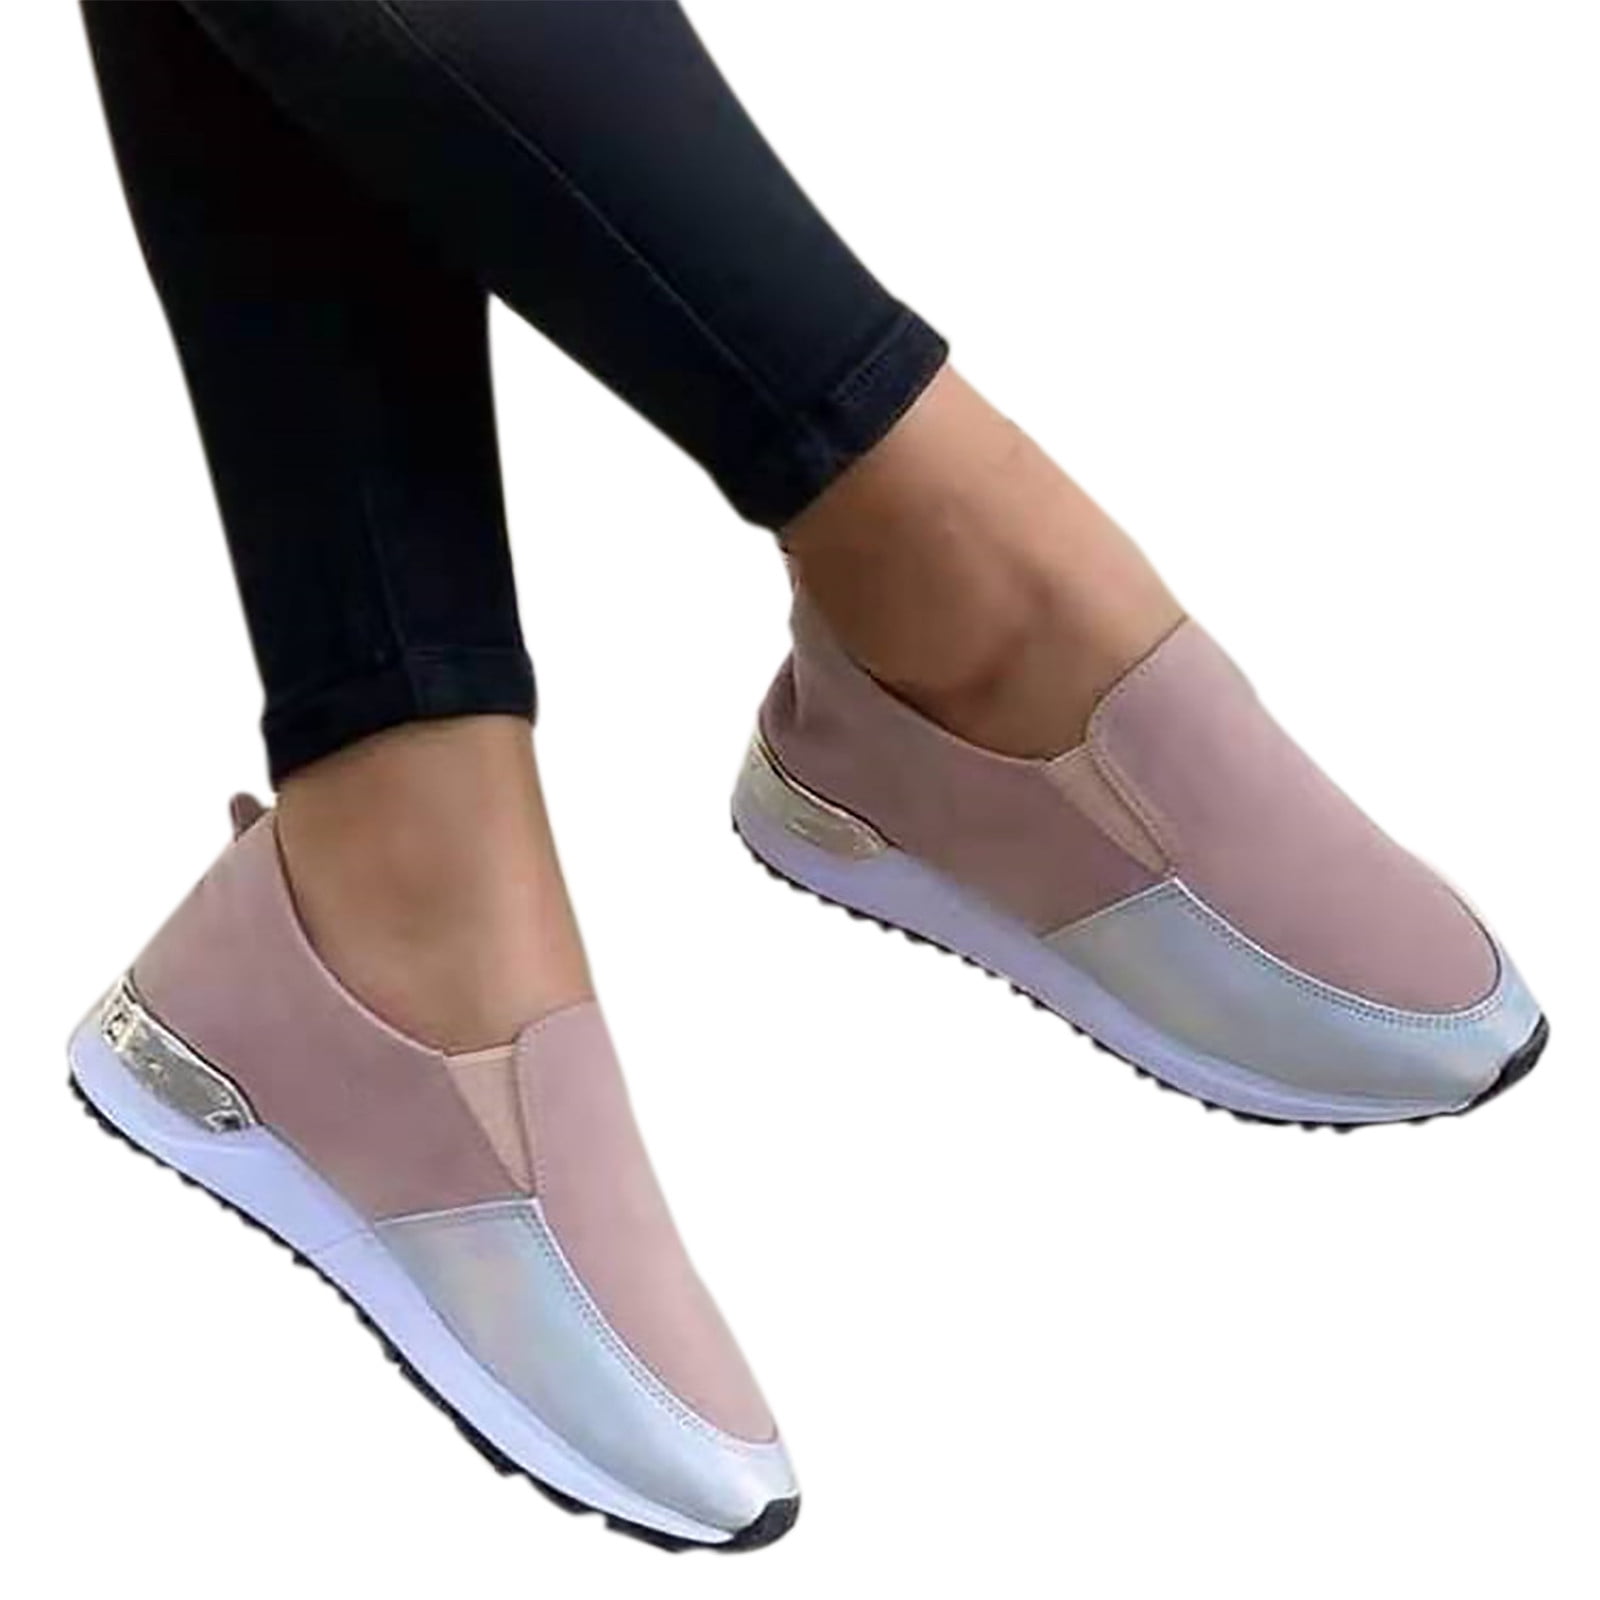 hush puppies shoes women heels - Buy hush puppies shoes women heels at Best  Price in Malaysia | h5.lazada.com.my